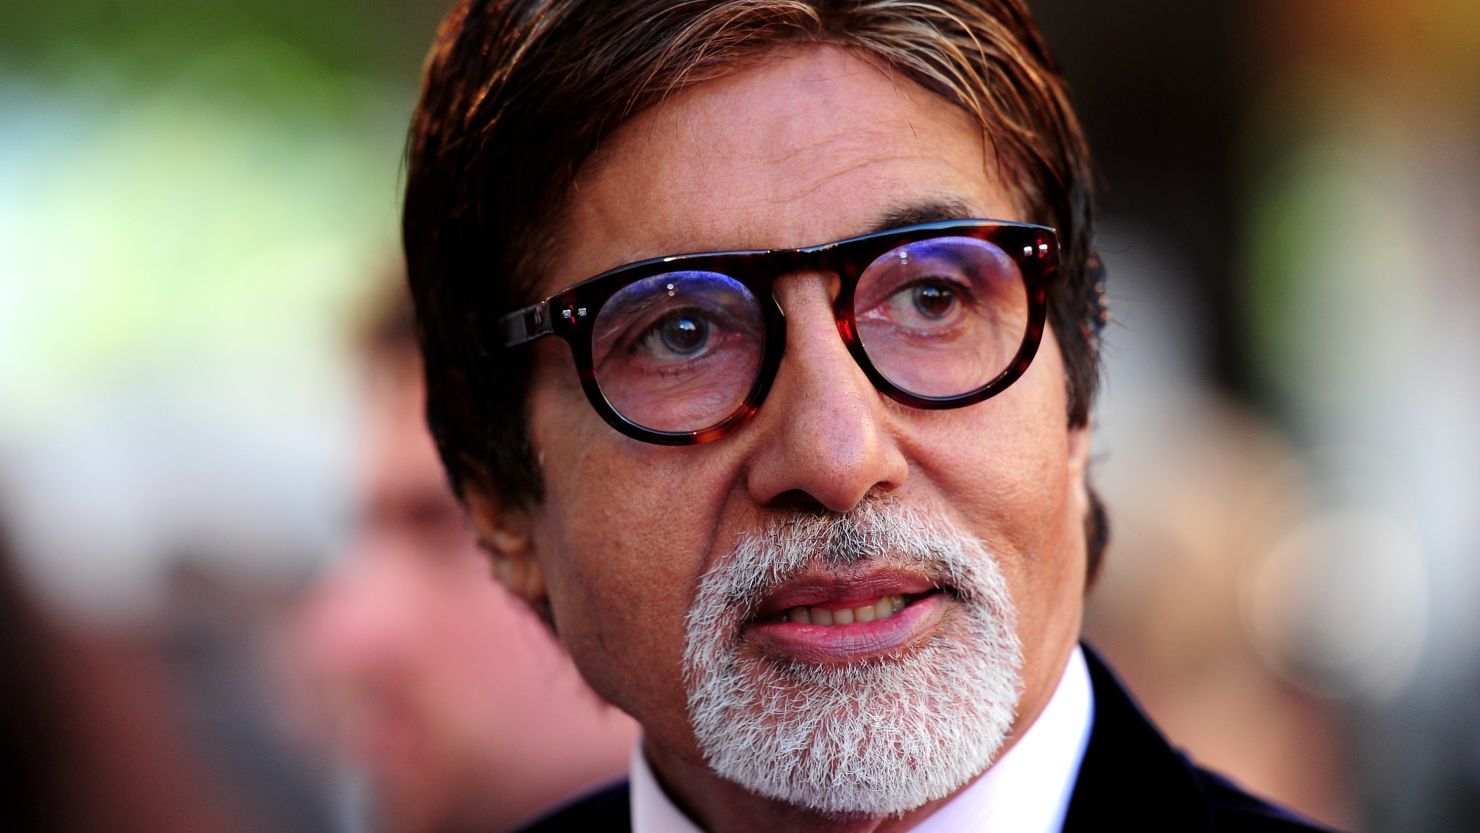 Bachchan is one of India's most revered film stars.